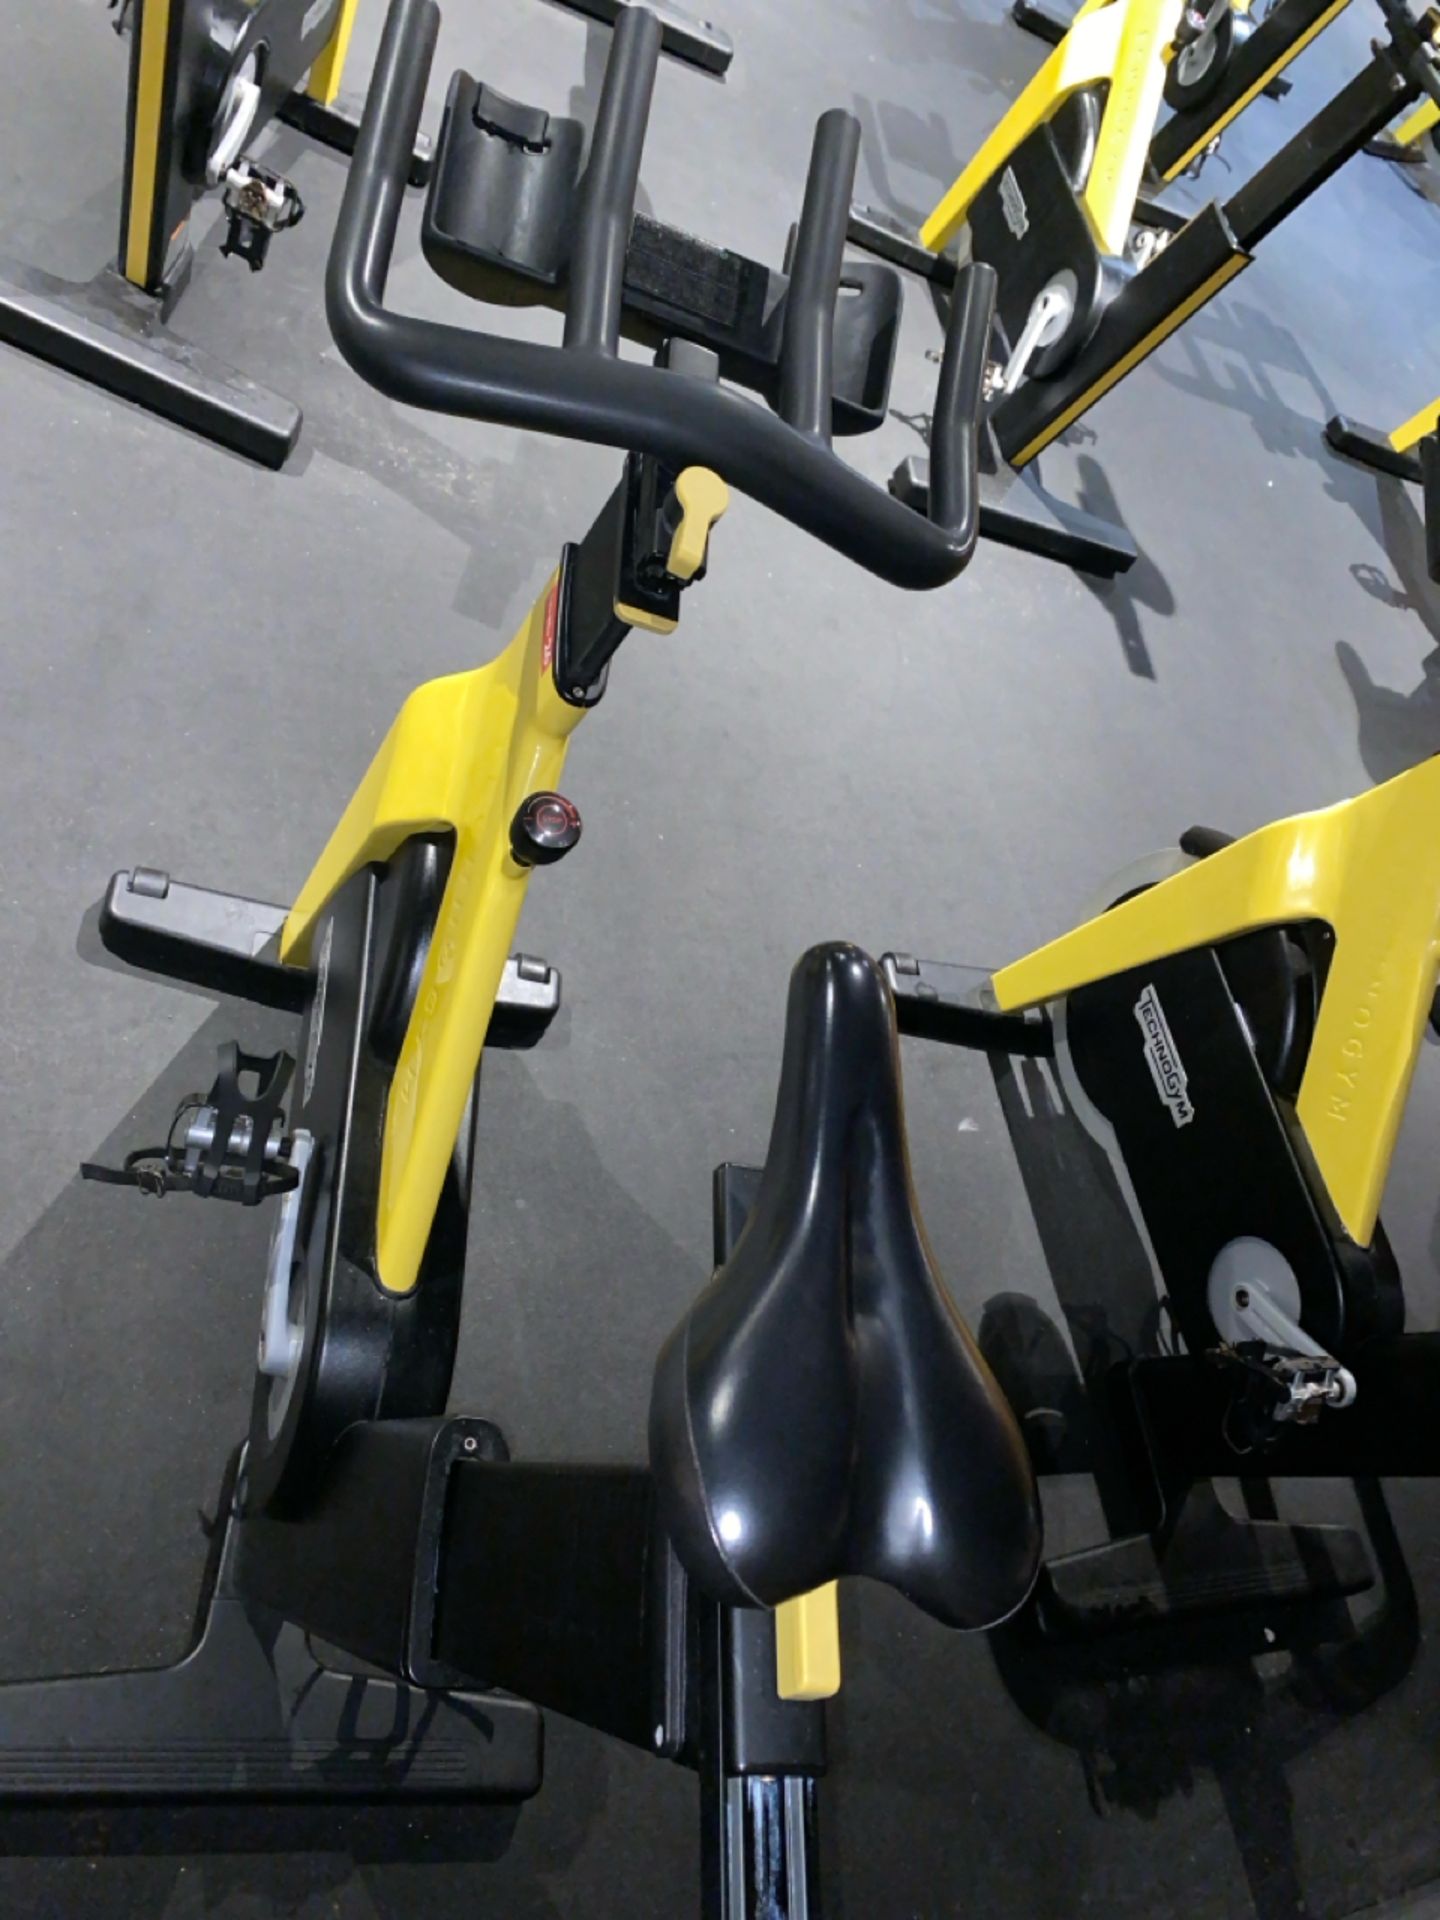 Technogym Group Cycle Ride Spin Bike - Image 3 of 10